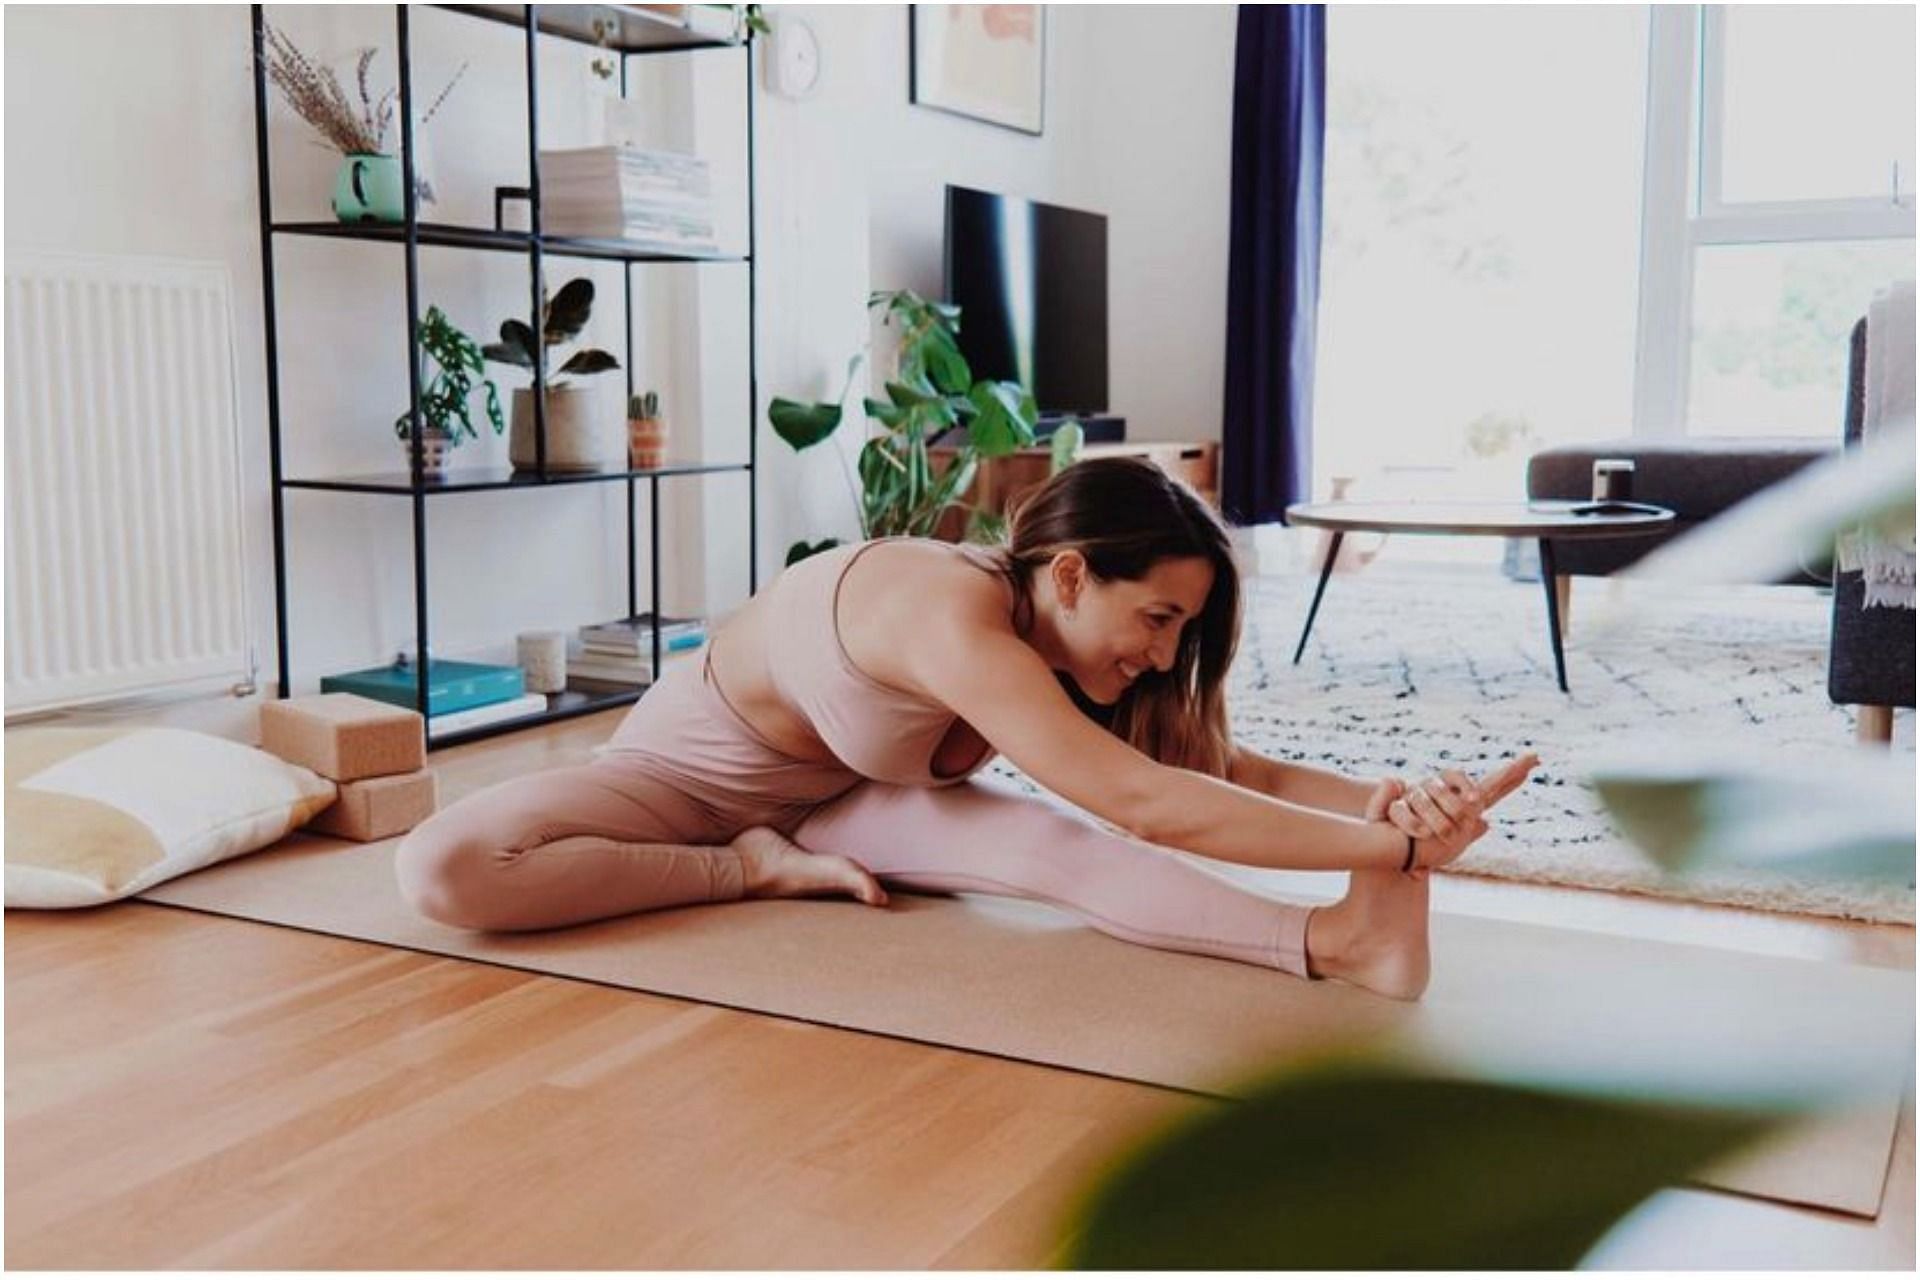 The head-to-knee pose is an excellent stretching asana. (Photo by marisseyoga via Instagram)